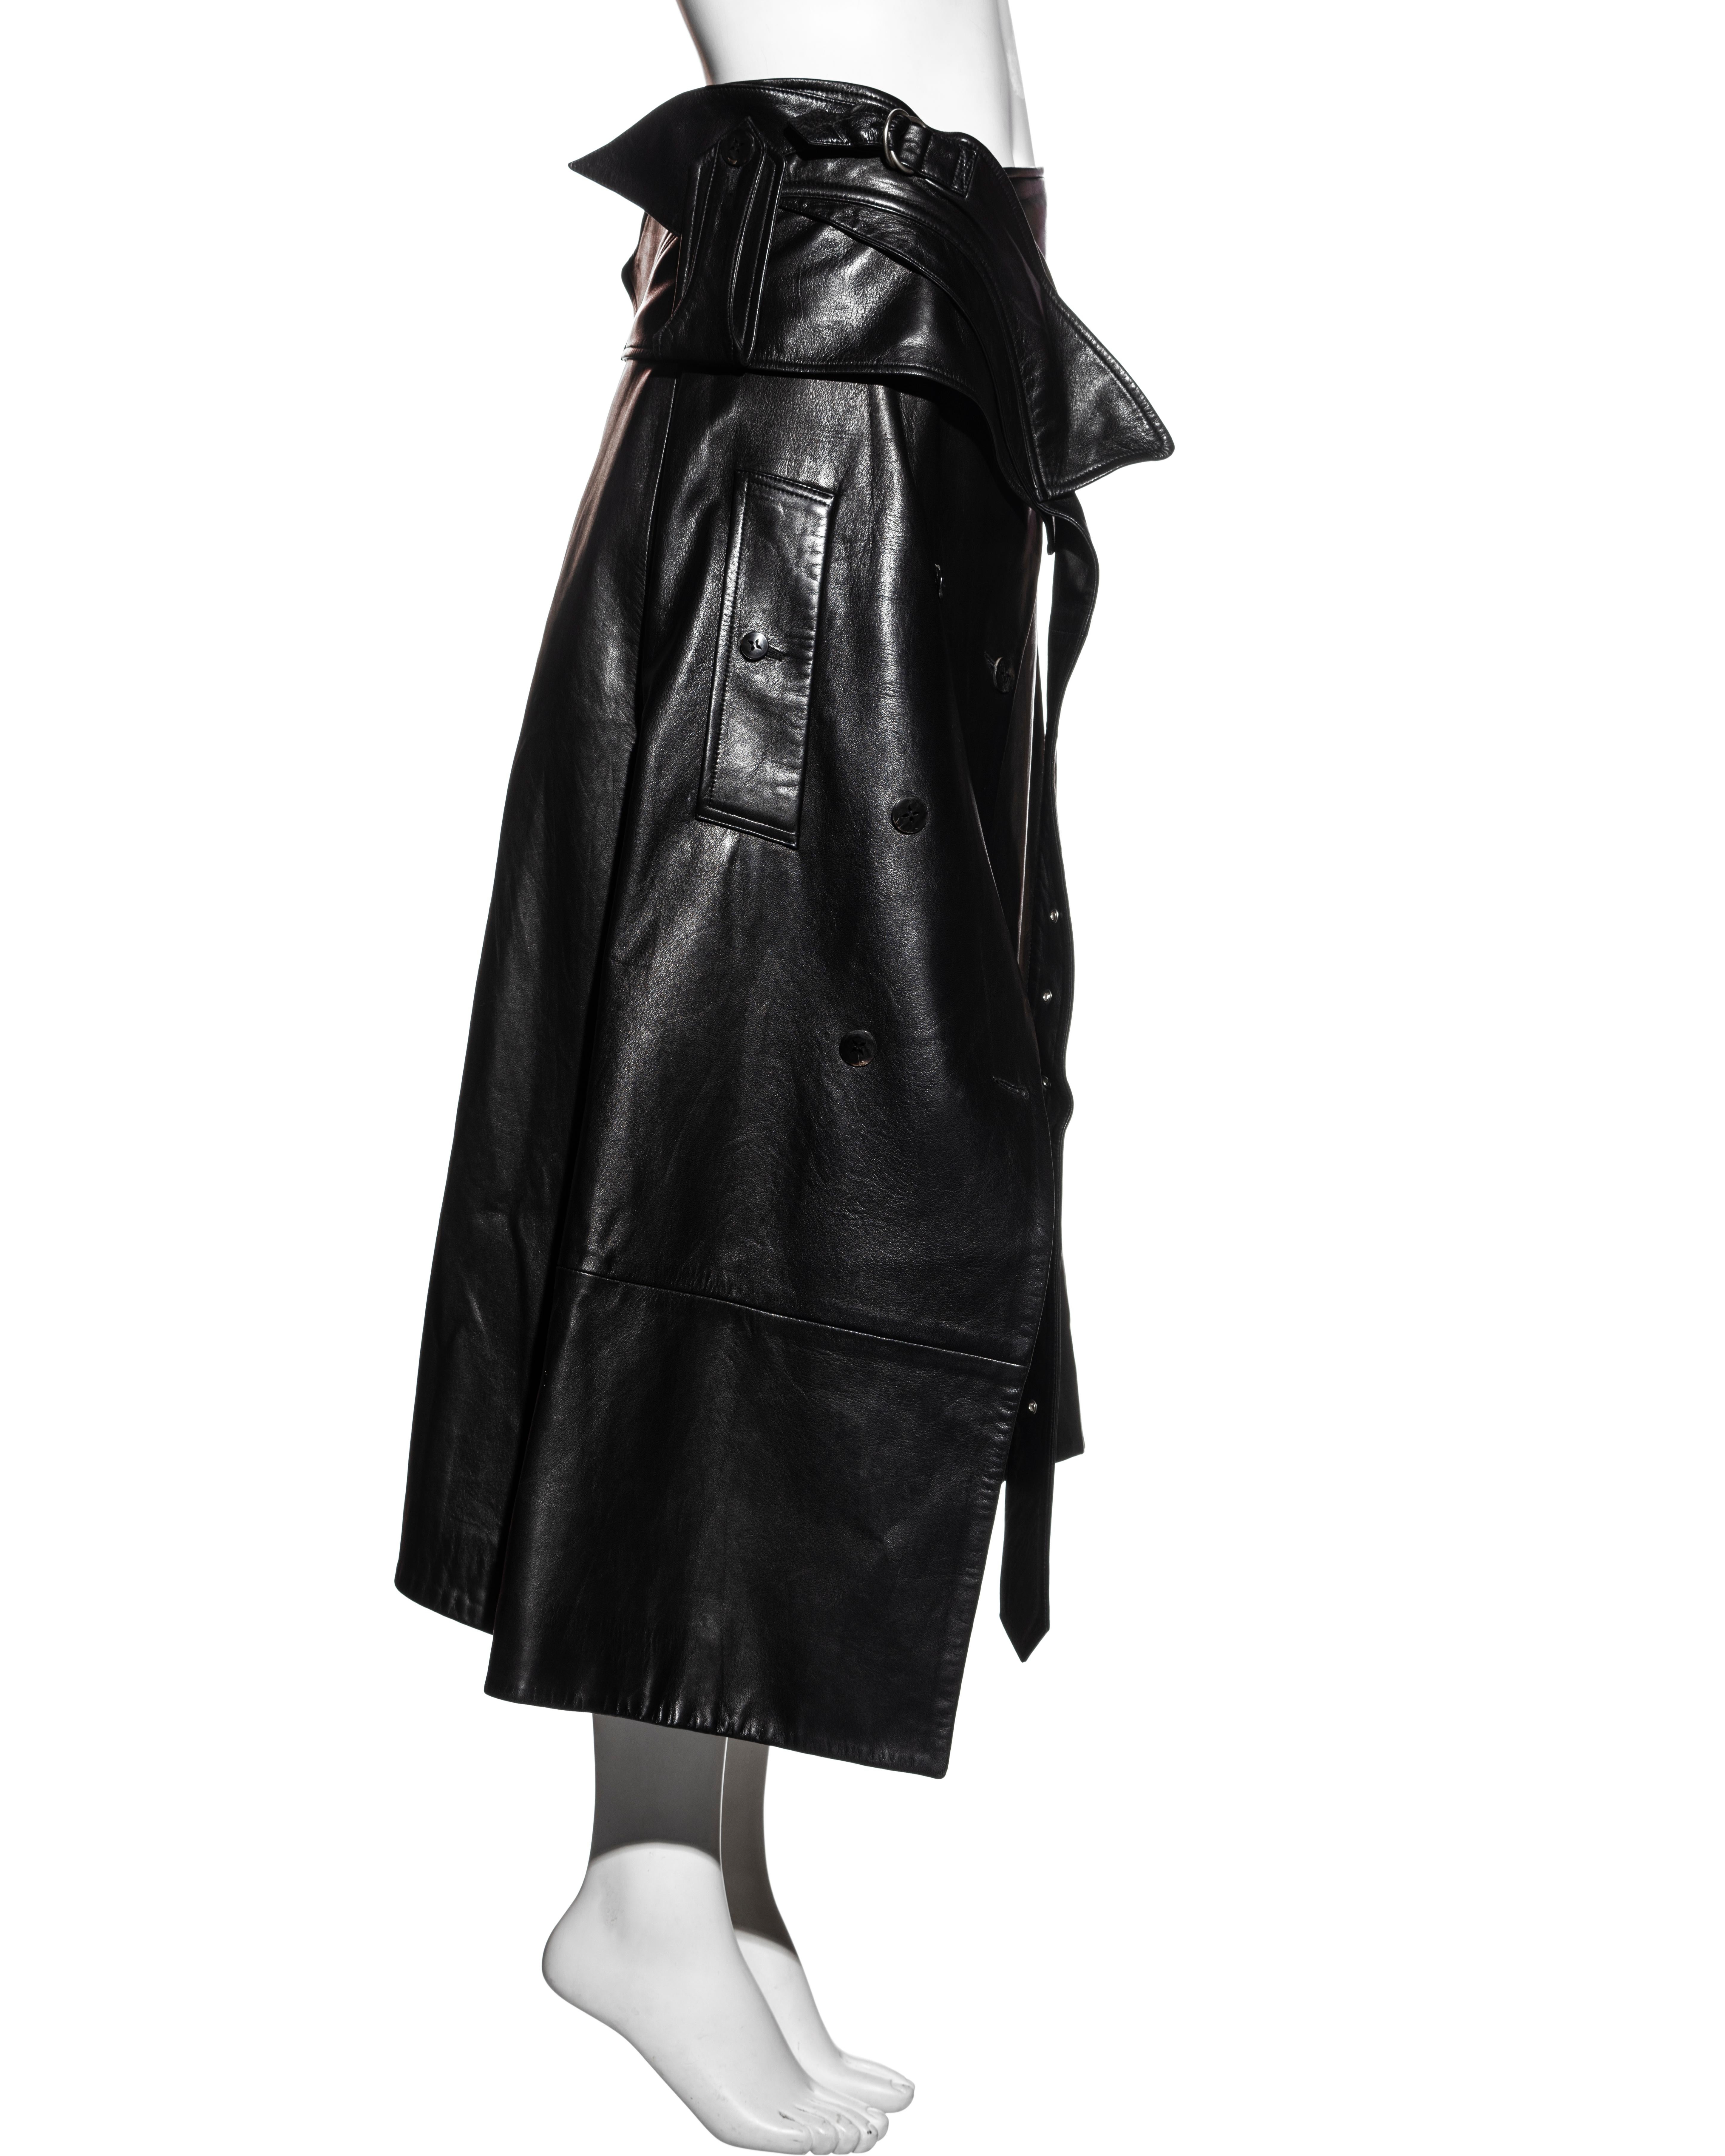 John Galliano black leather deconstructed wrap skirt, c. 2002 For Sale 2